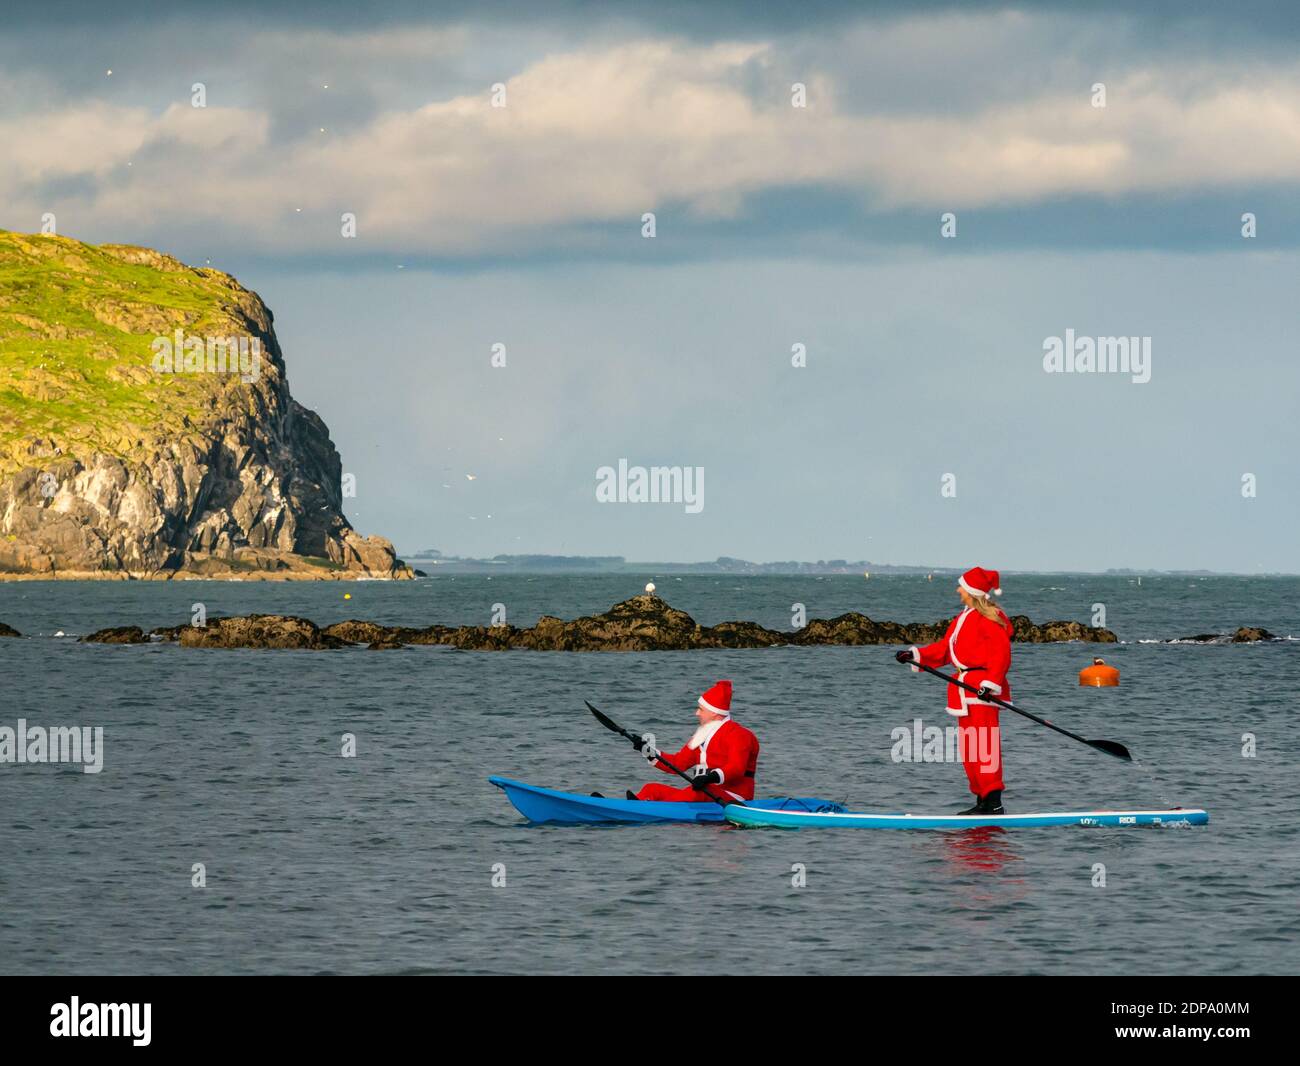 North Berwick, East Lothian, Scotland, United Kingdom, 19th December 2020. Paddle Boarding Santas for charity: a local community initiative by North Berwick News and Views called 'Christmas Cheer' raises over £5,000 funds for families in need Stock Photo